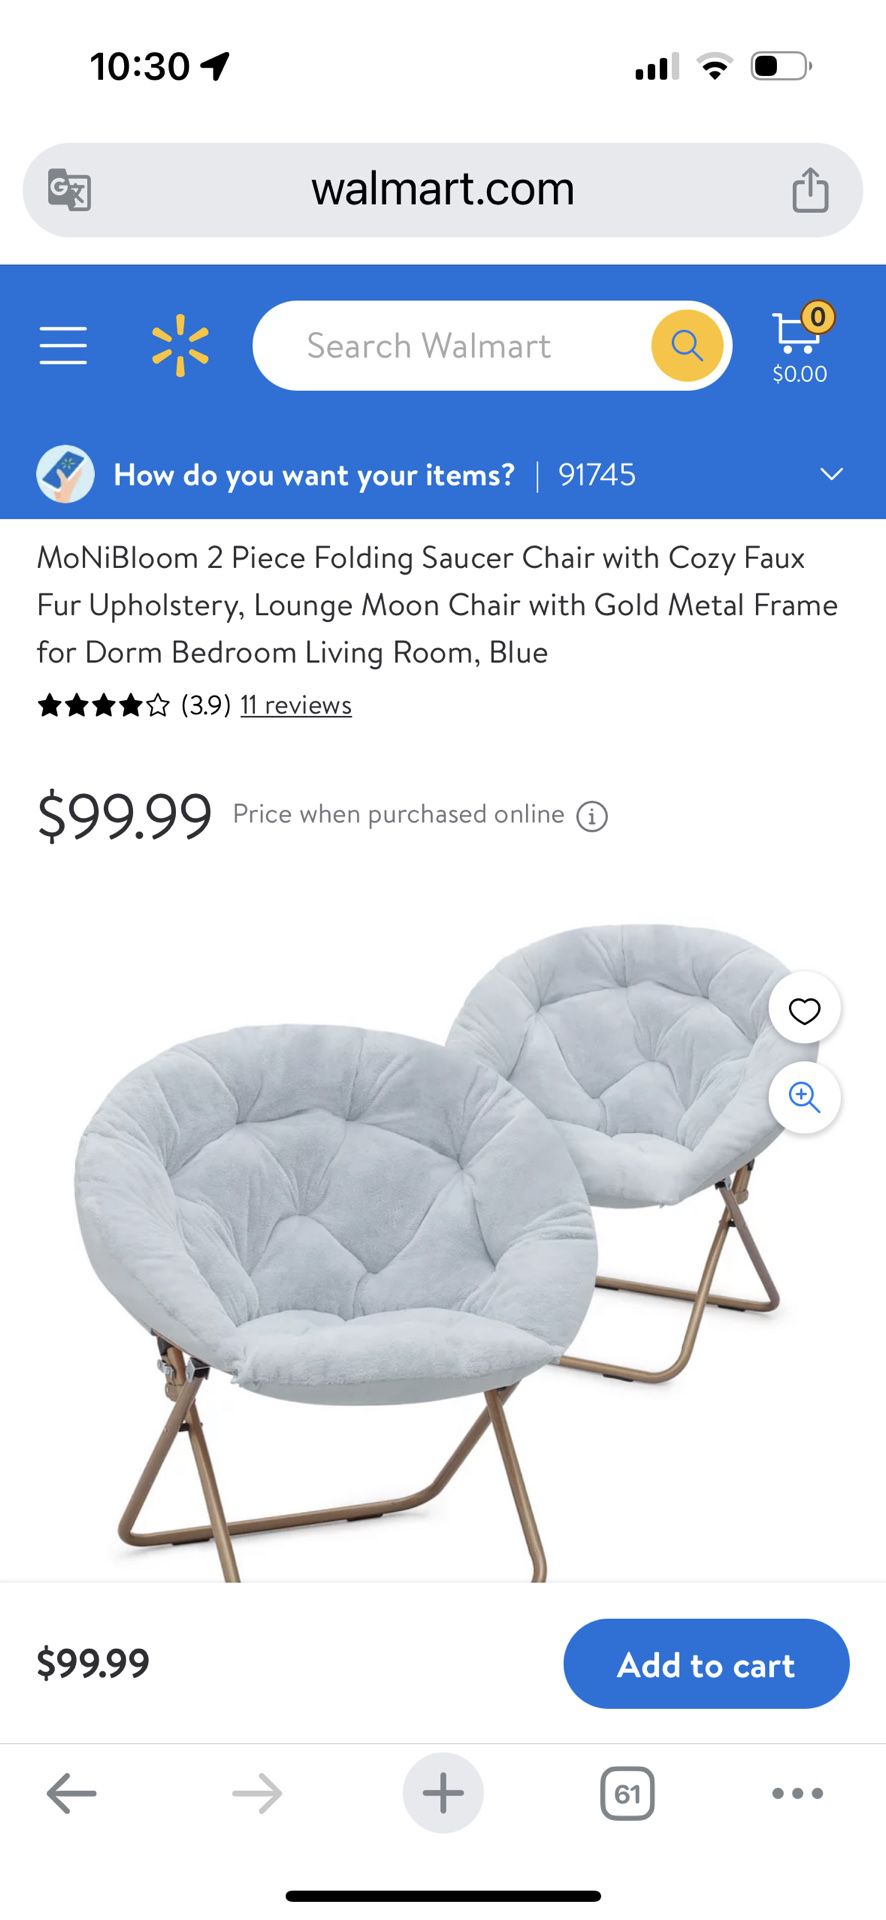  2 Piece Folding Saucer Chair with Cozy Faux Fur Upholstery, Lounge Moon Chair with Gold Metal Frame for Dorm Bedroom Living Room, Blue